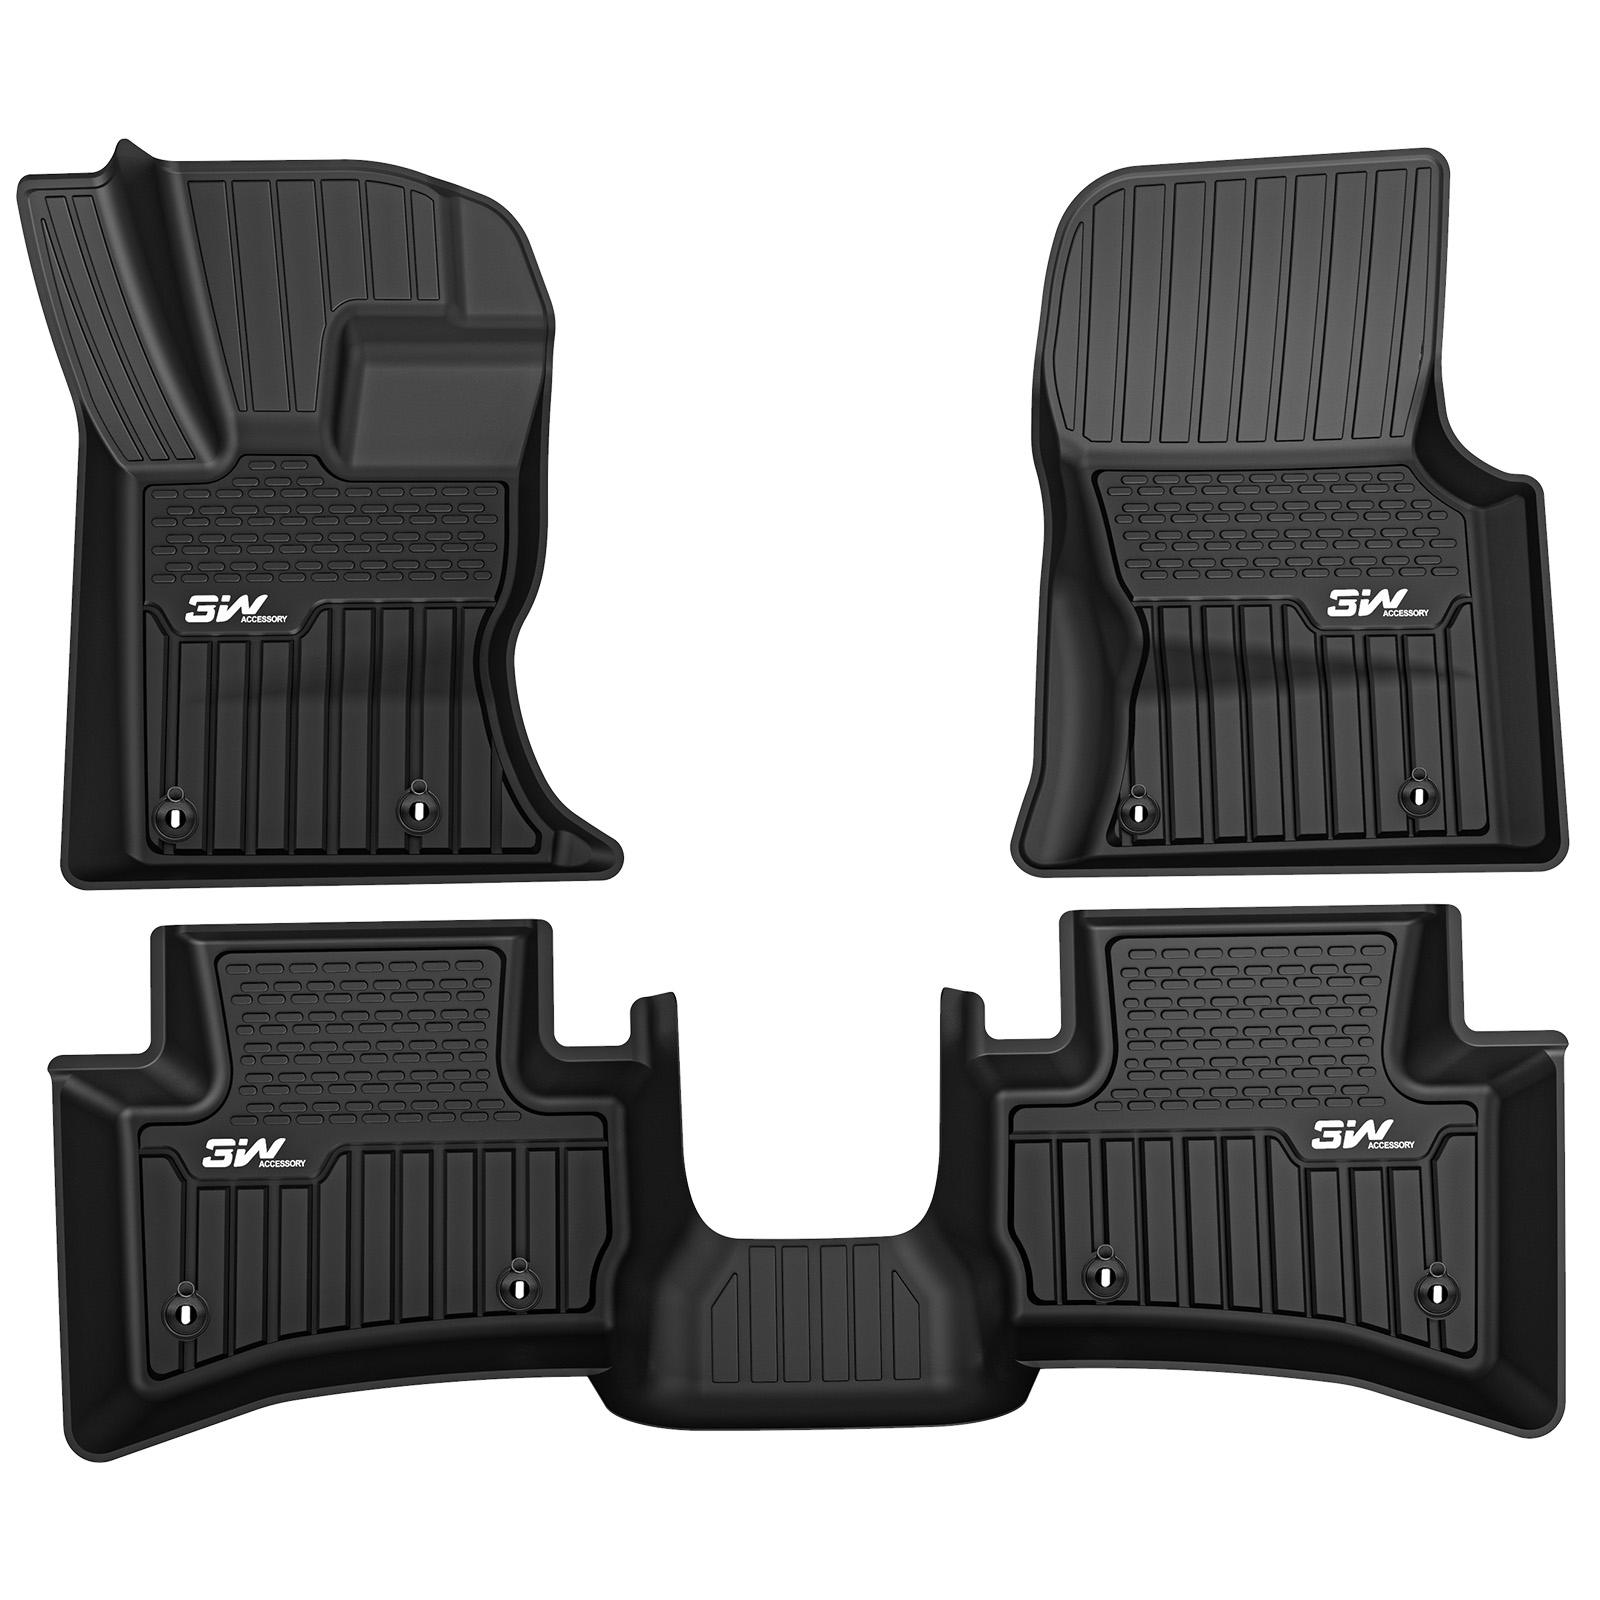 3W Jaguar F-pace 2017-2025 Custom Floor Mats TPE Material & All-Weather Protection Vehicles & Parts 3W 2017-2025 F-pace 2017-2025 1st&2nd Row Mats